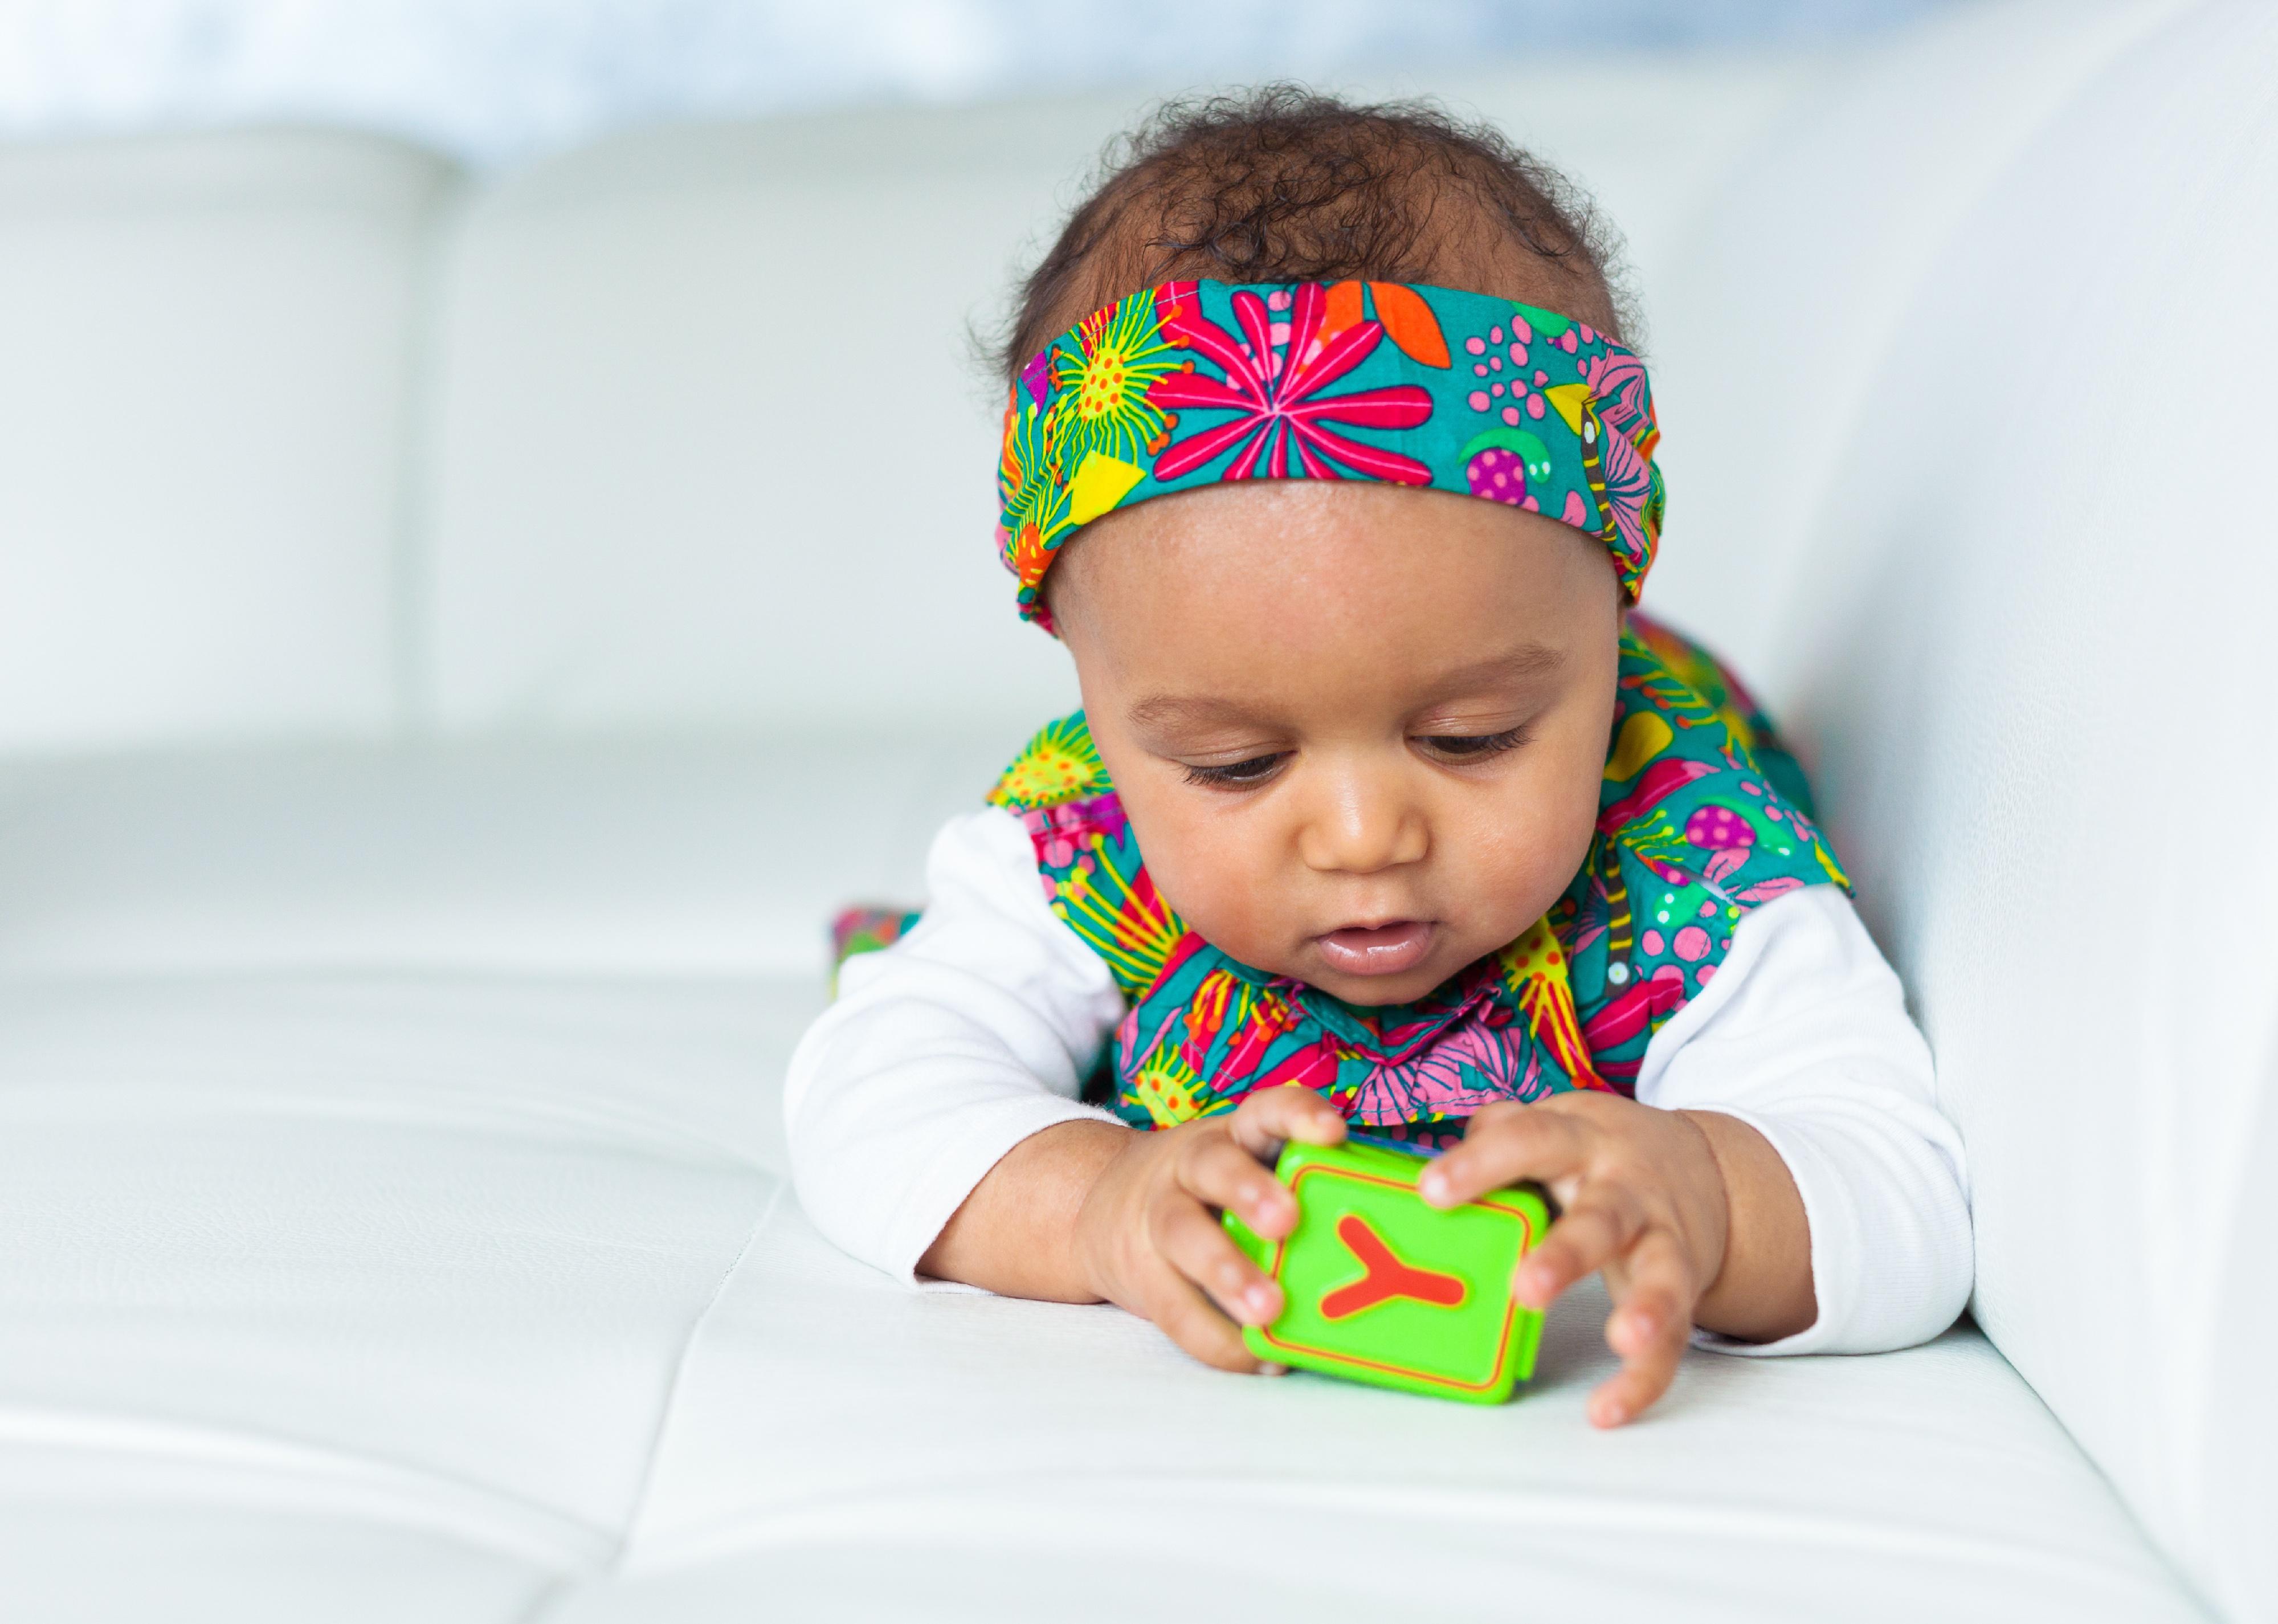 Baby wearing colorful headband playing with toy.